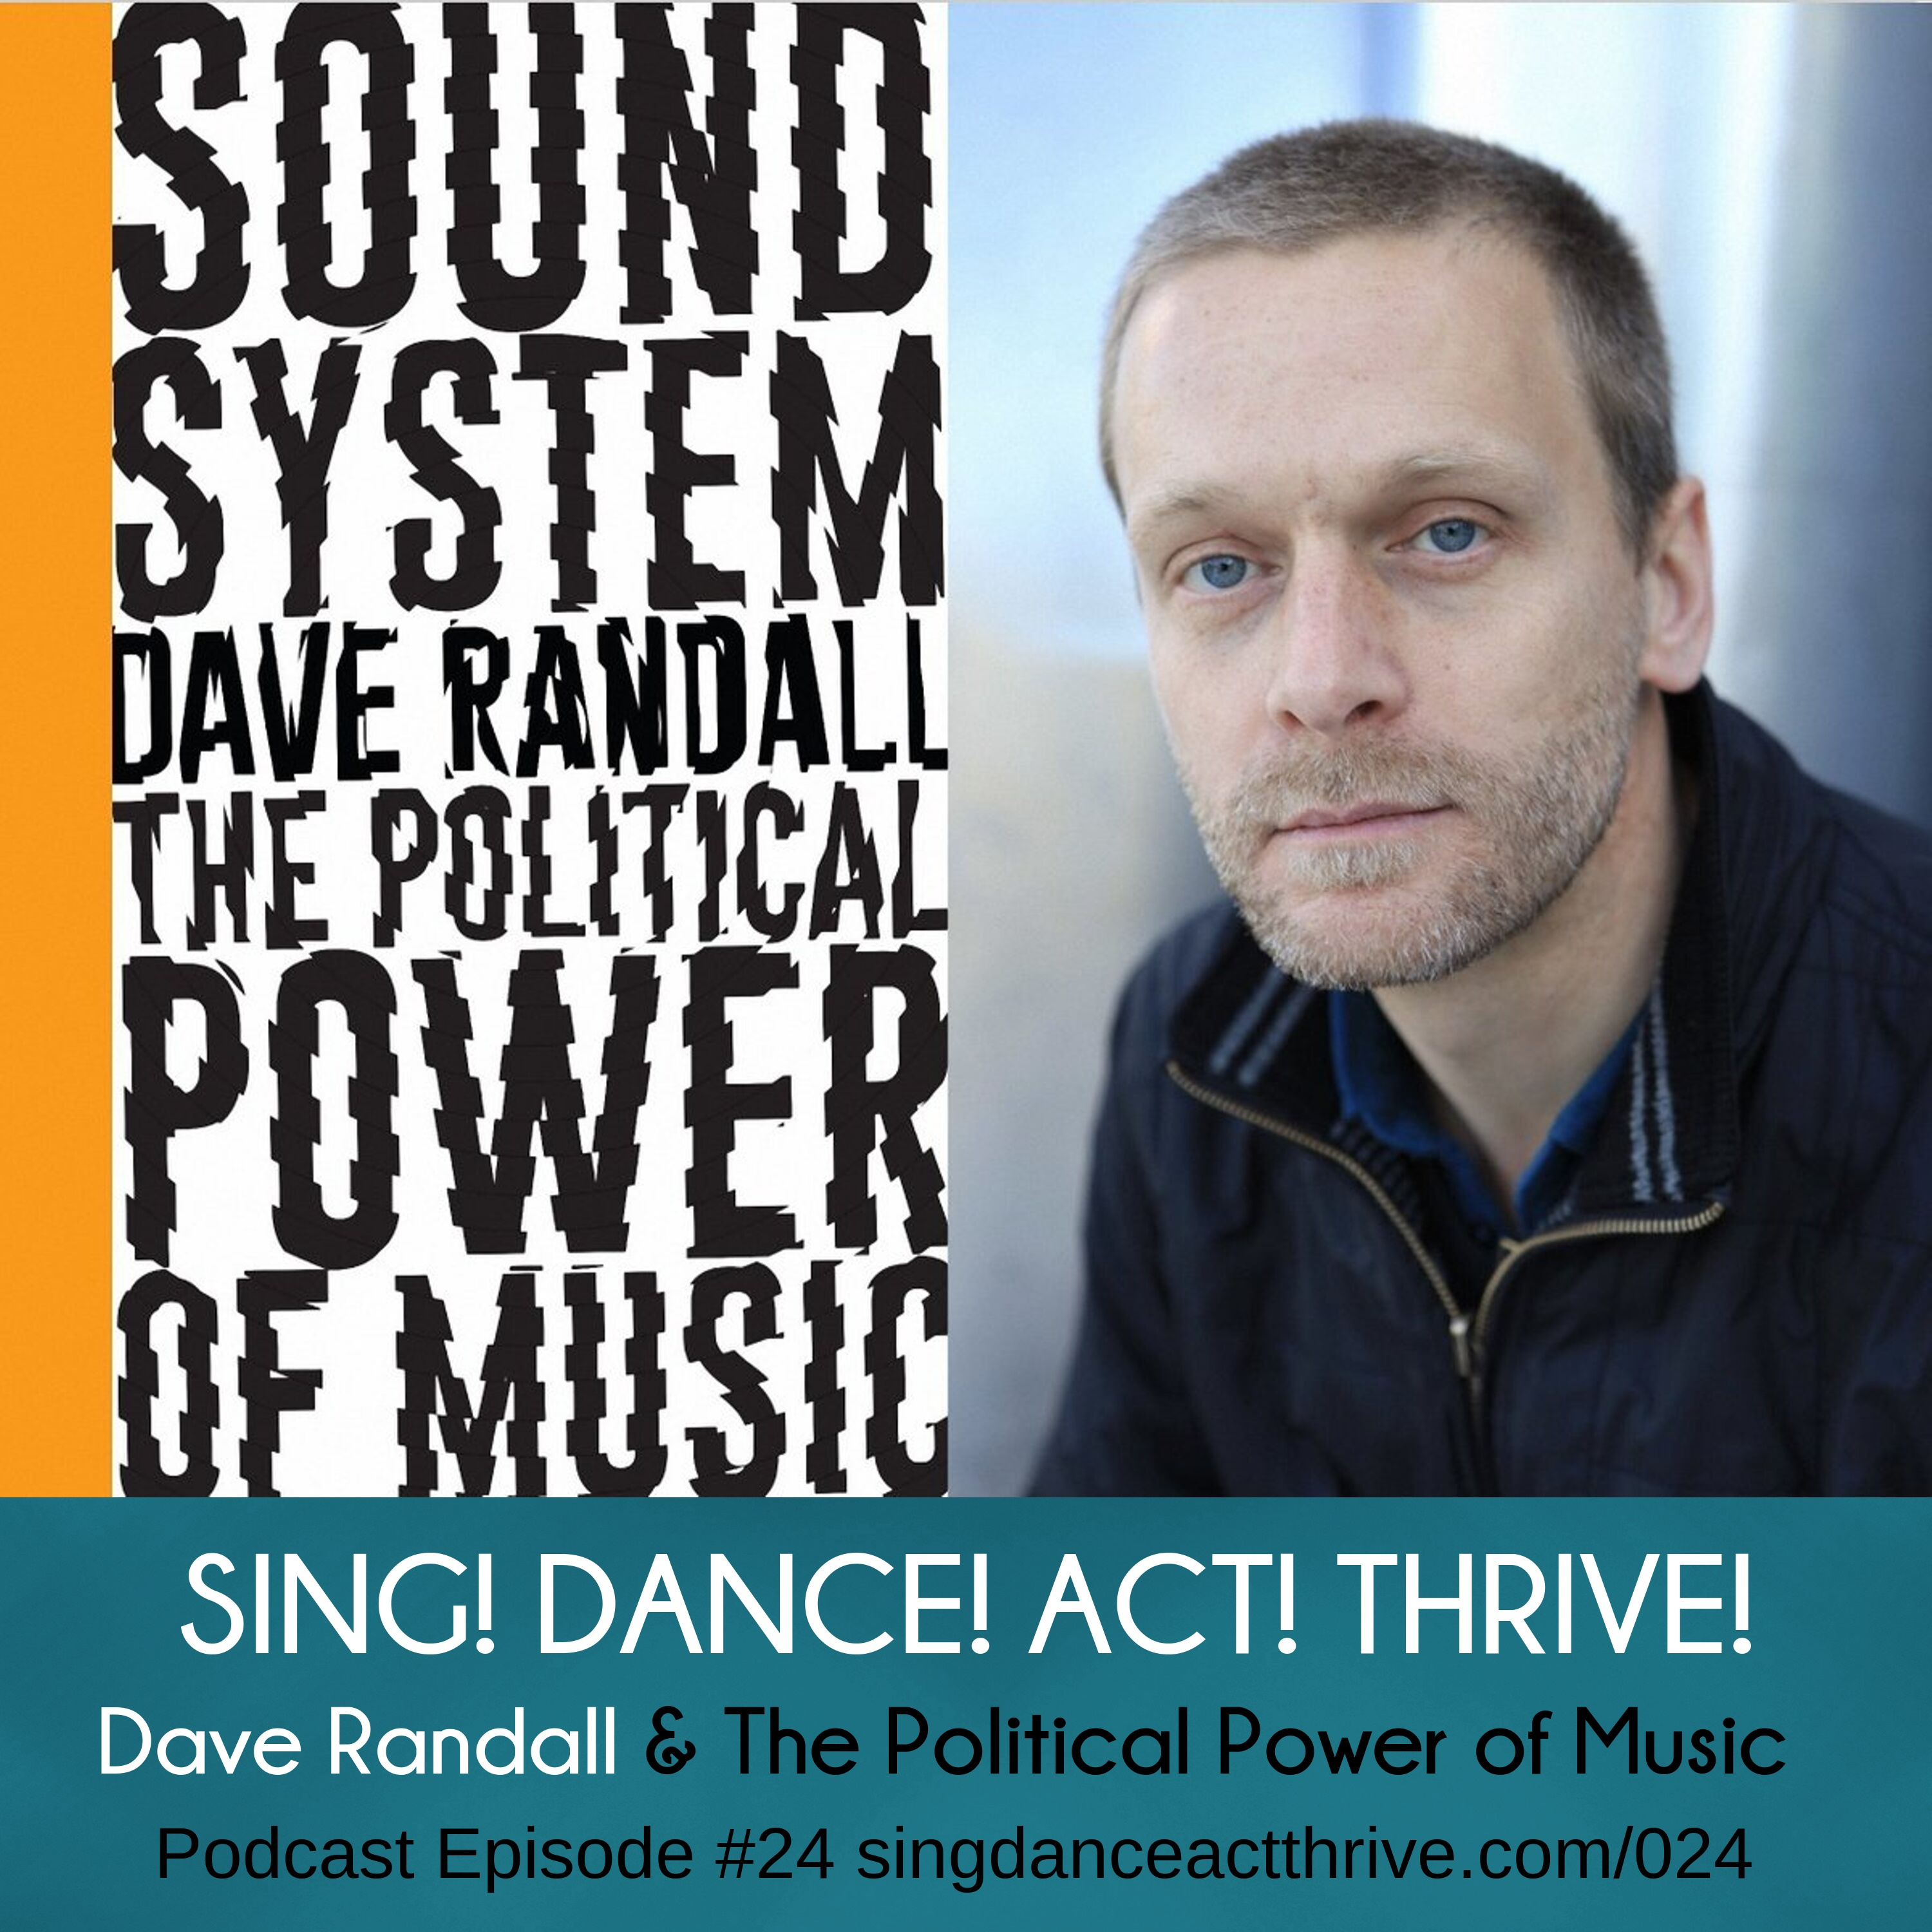 Dave Randall & The Political Power of Music